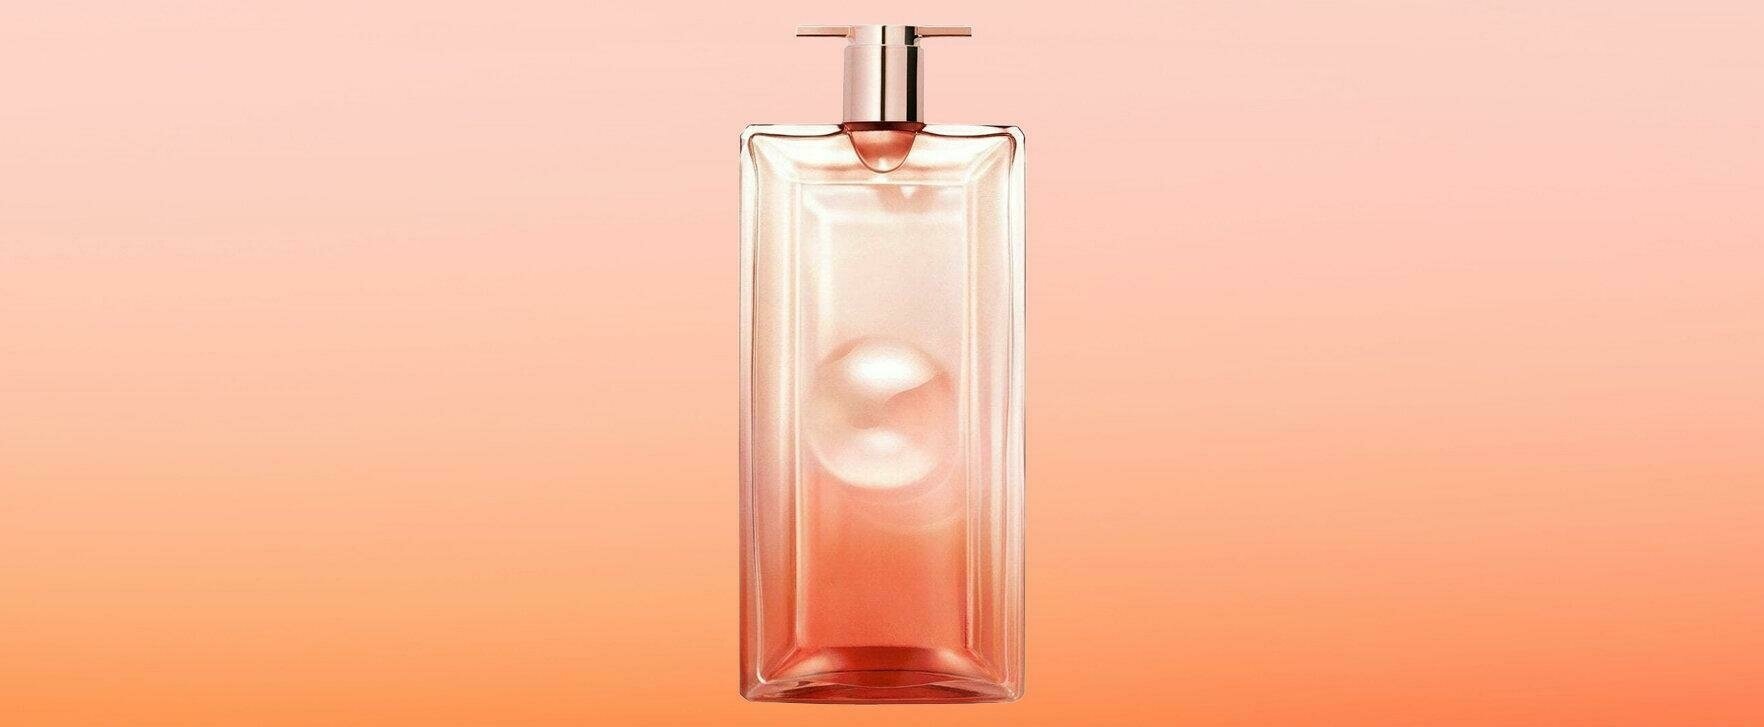 "Idôle Now": The New Floral Fragrance by Lancôme